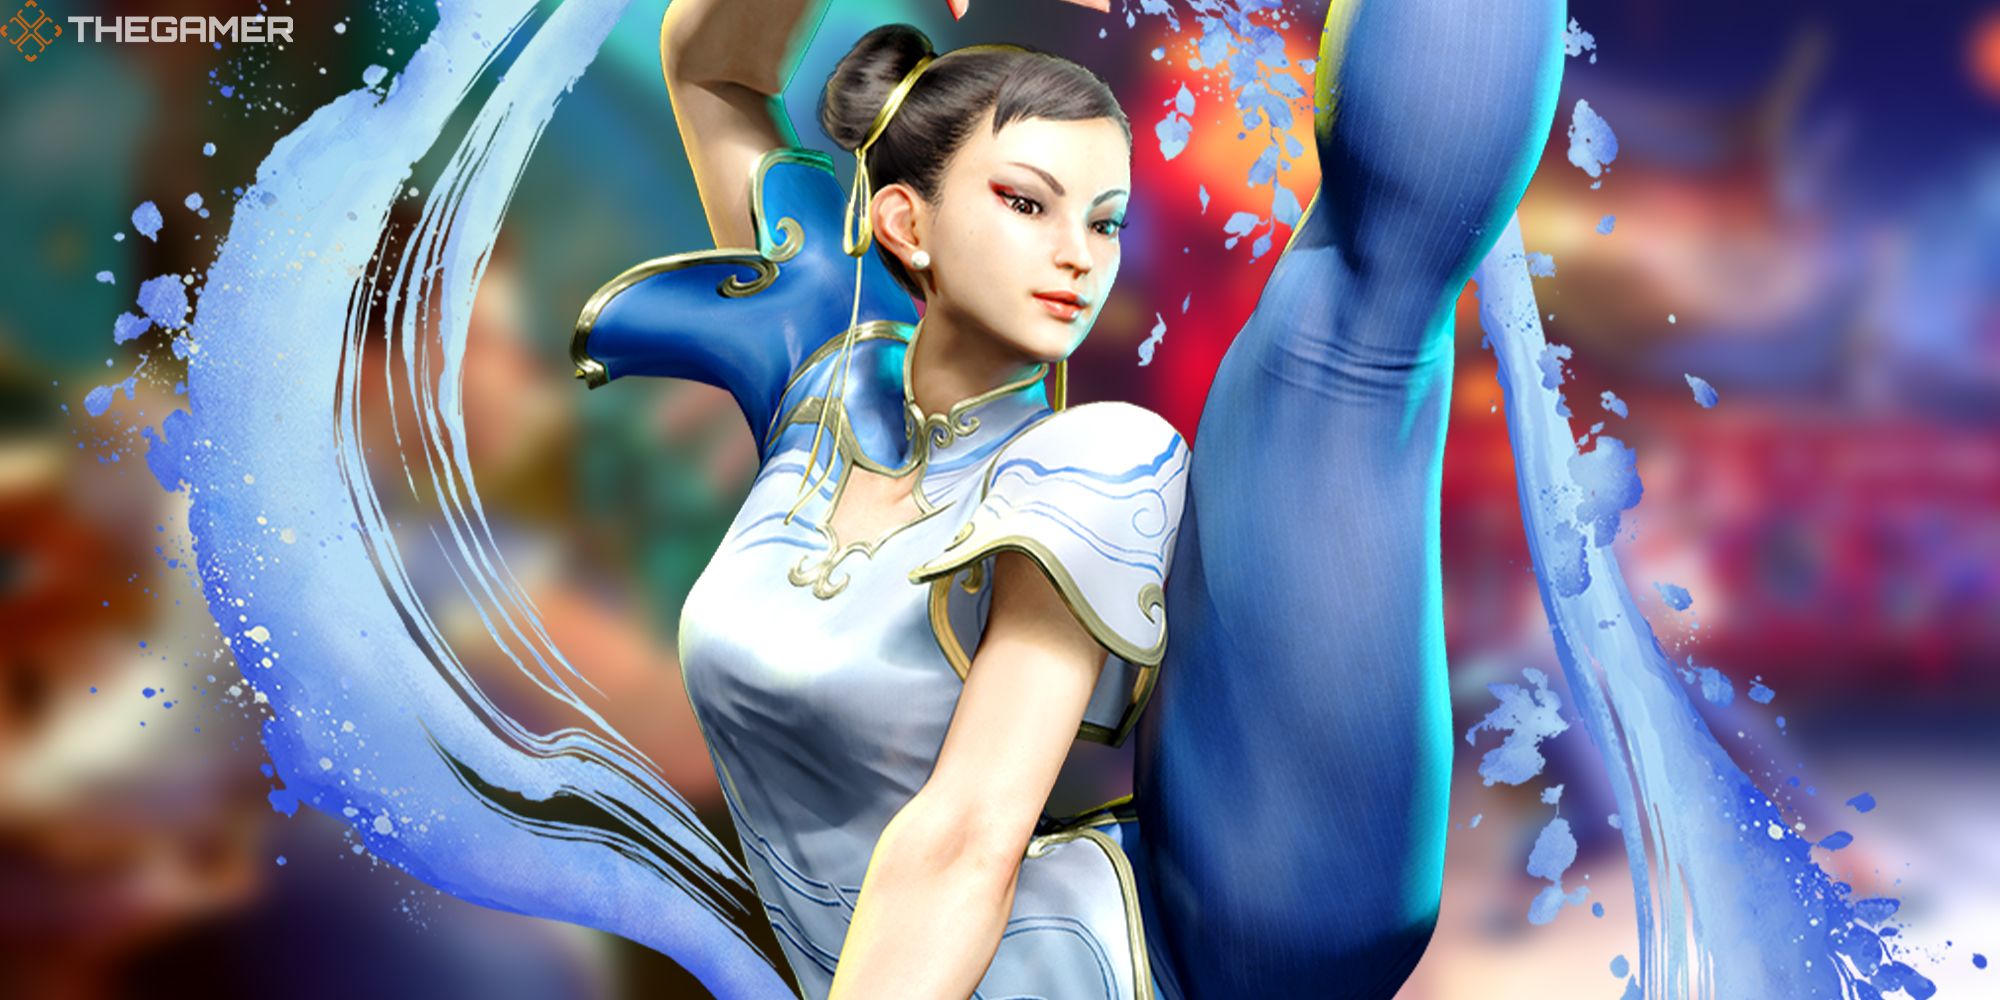 Chun-li, from Street Fighter 6, stands in front of blurred photos from a battle at Tian Hong Yuan.